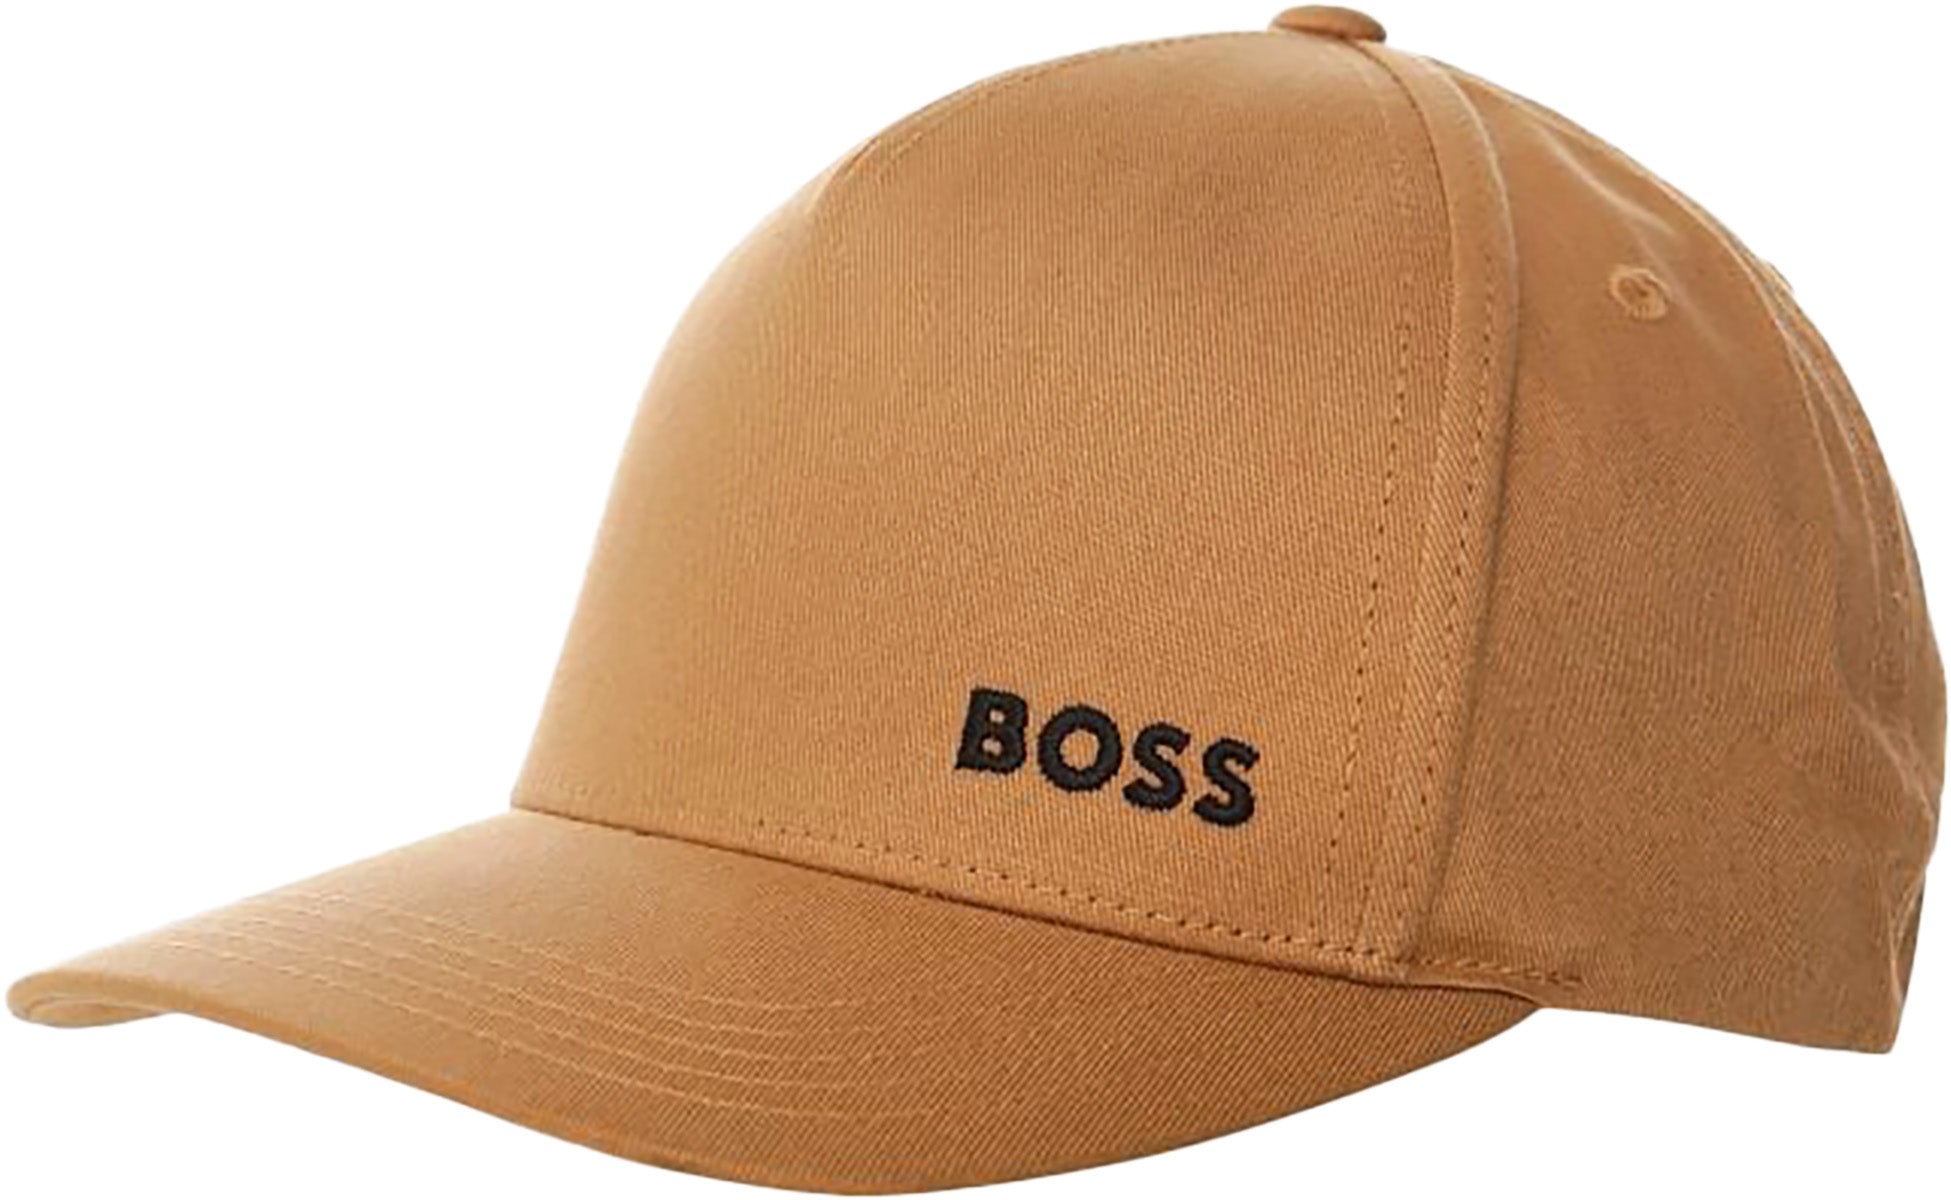 Boss Sevile Iconic Woven In Beige Casual | Cotton – Hat Boss Cap Hugo 4feetshoes 